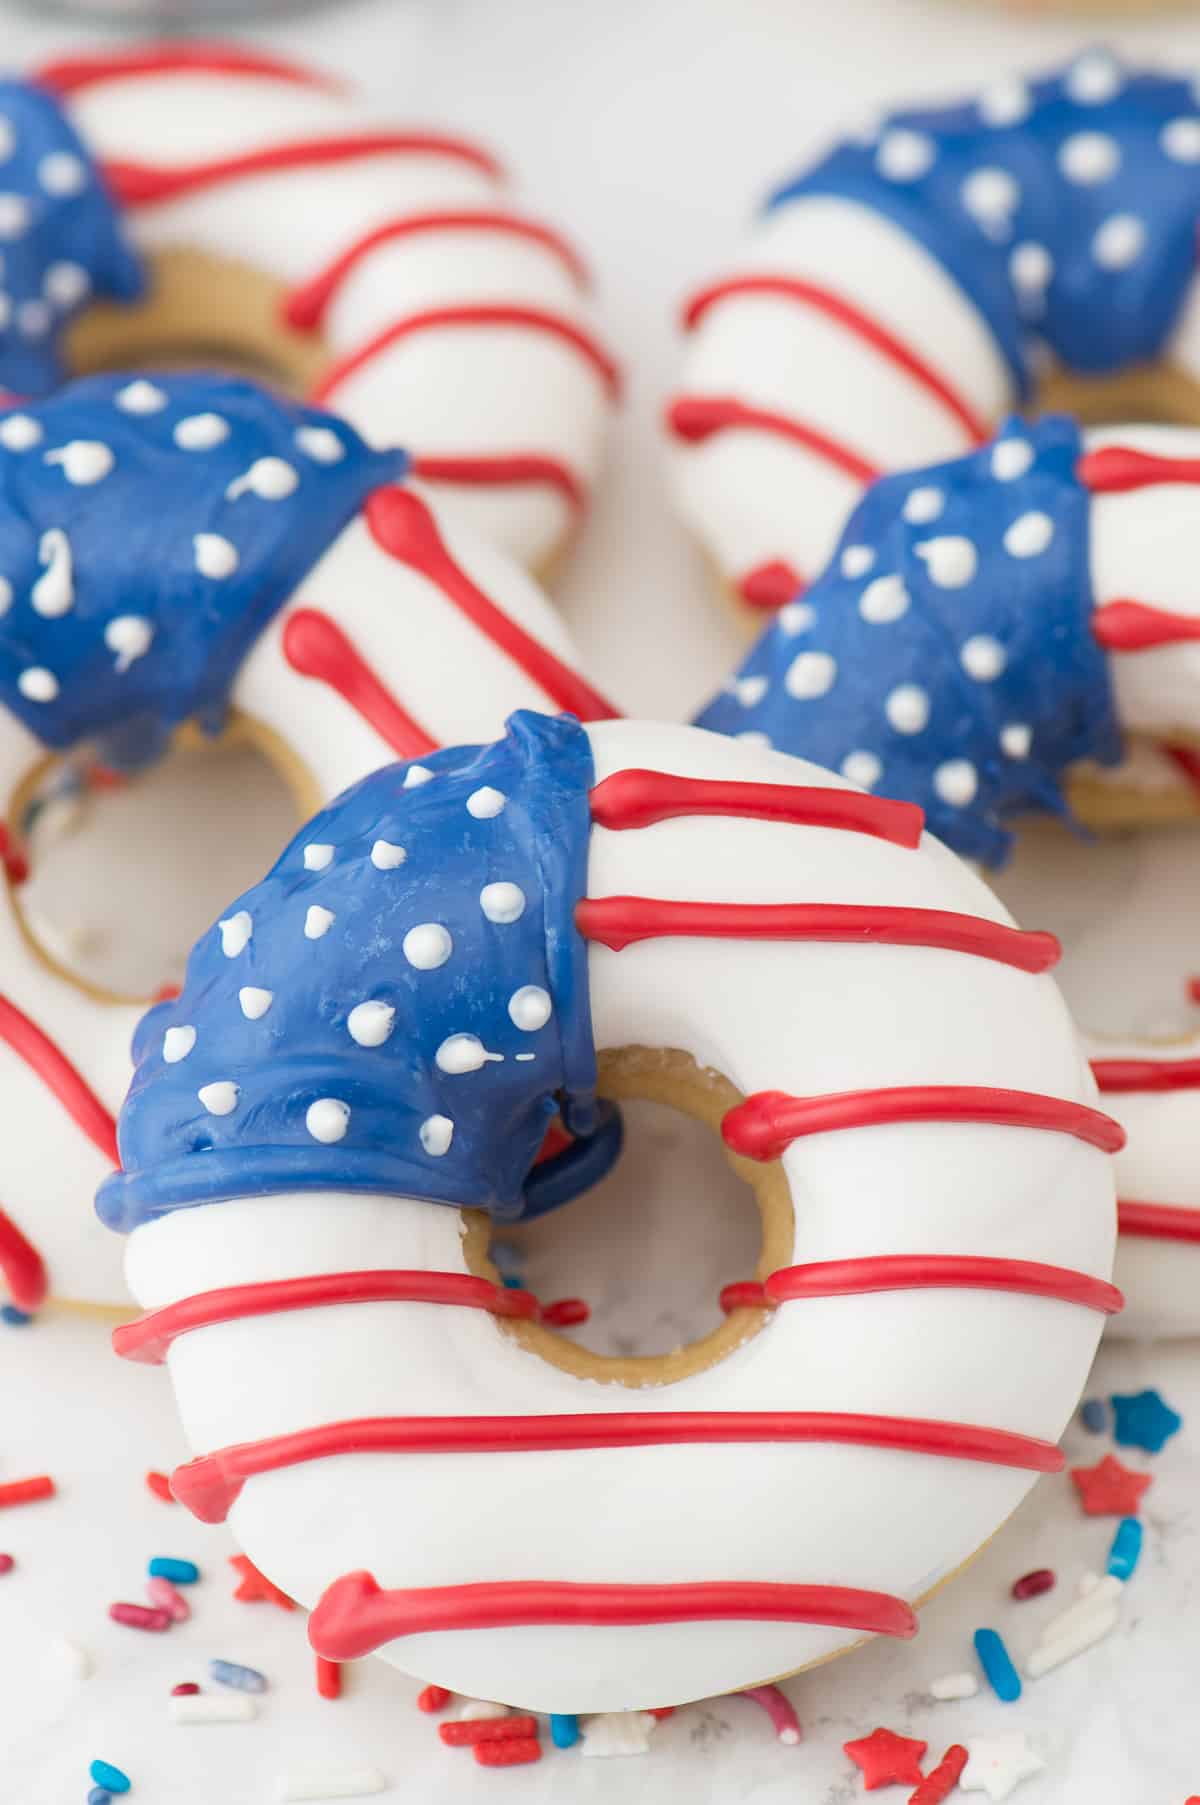 Five homemade American Flag Donuts surrounded by colorful sprinkles.